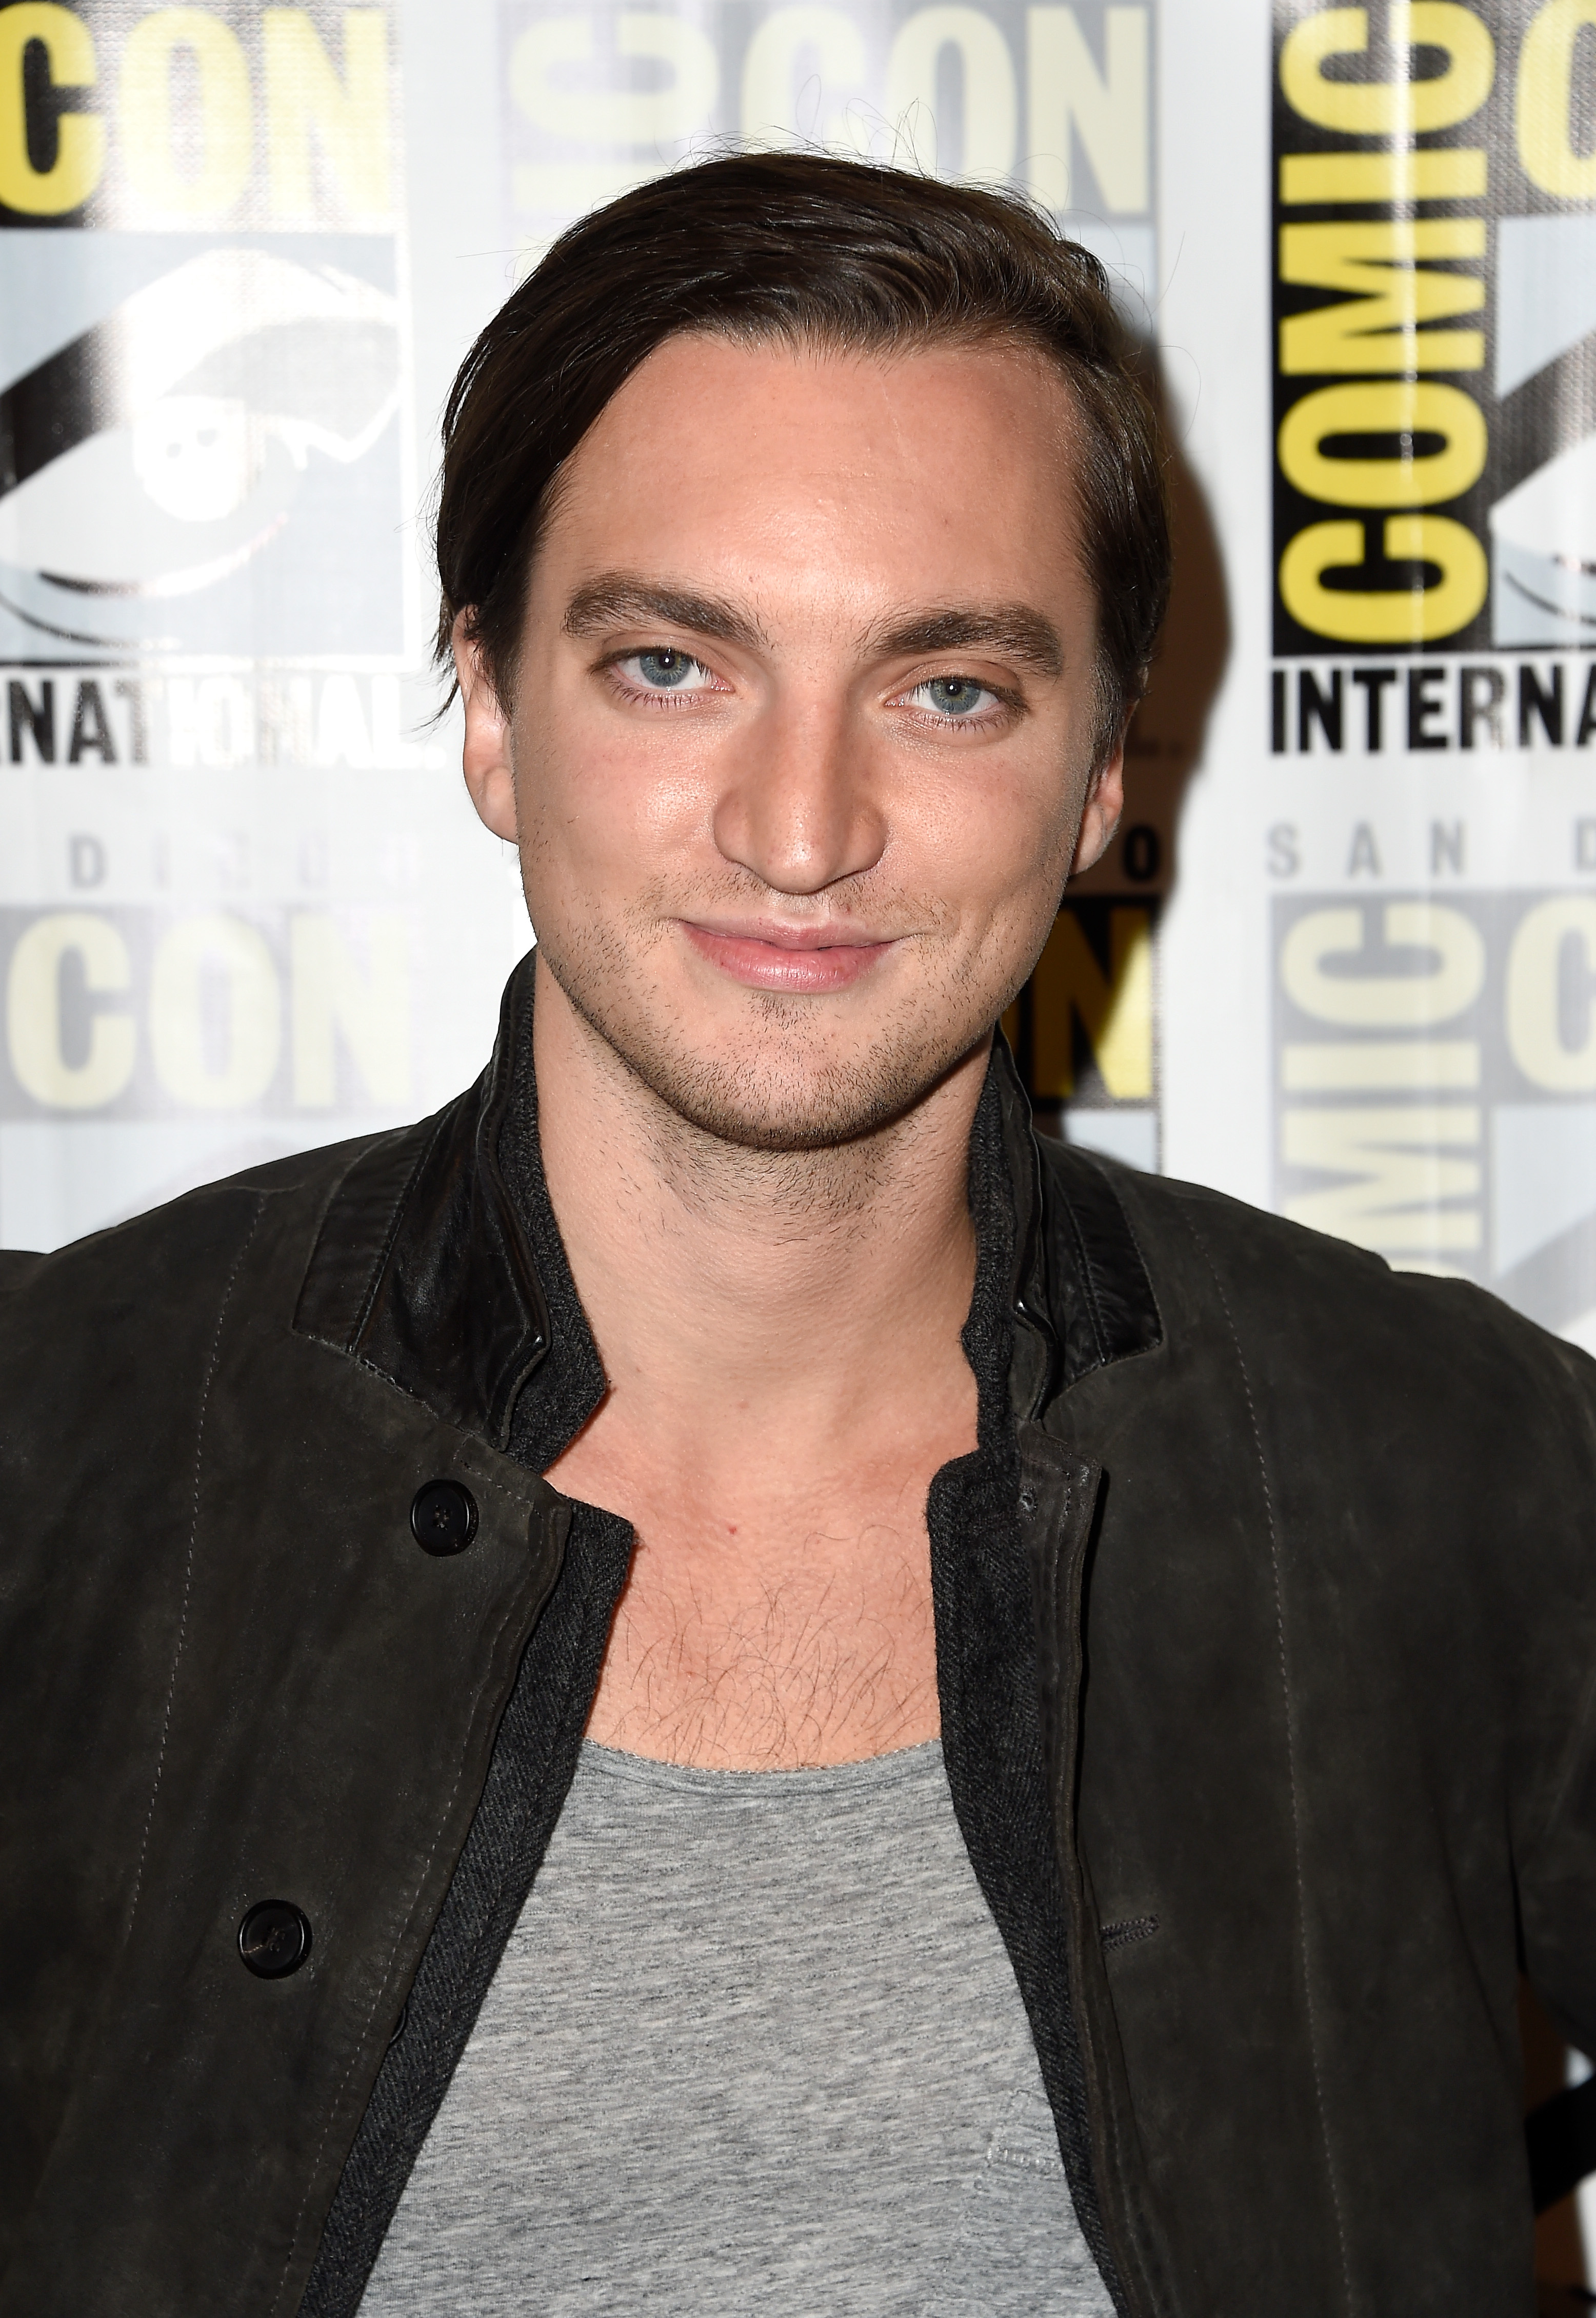 Richard Harmon is pictured at the 'Los 100' , 'The 100', photocall at Santo Mauro hotel on June 12, 2019, in Madrid, Spain | Source: Getty Images